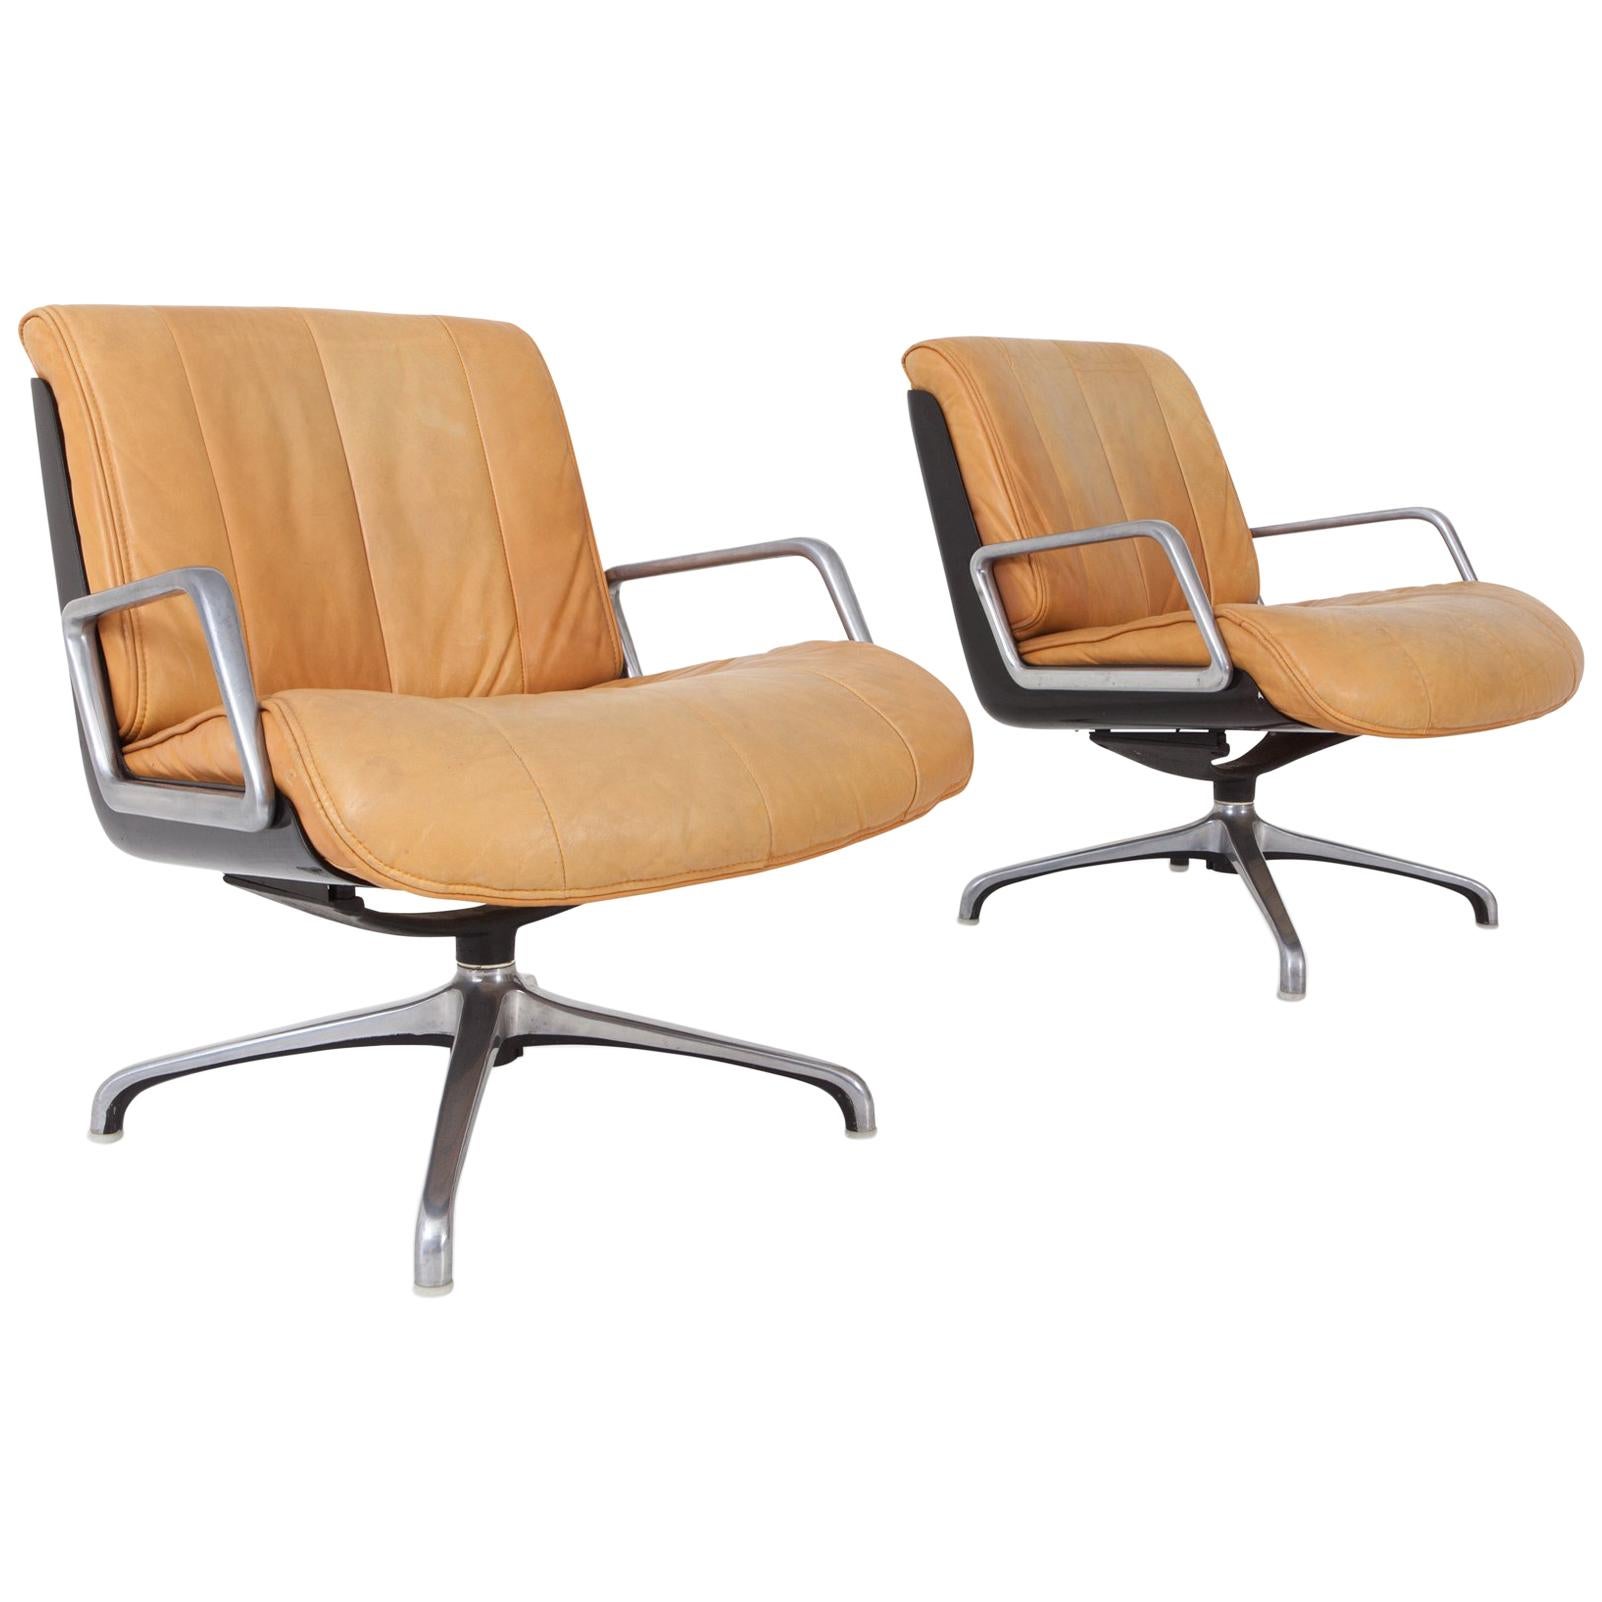 Postmodern swivel lounge chair made by Saporiti, Italy, 1970s.

Nude or camel leather seating, aluminum armrests and base, black plastic back. 

We have two pieces available.